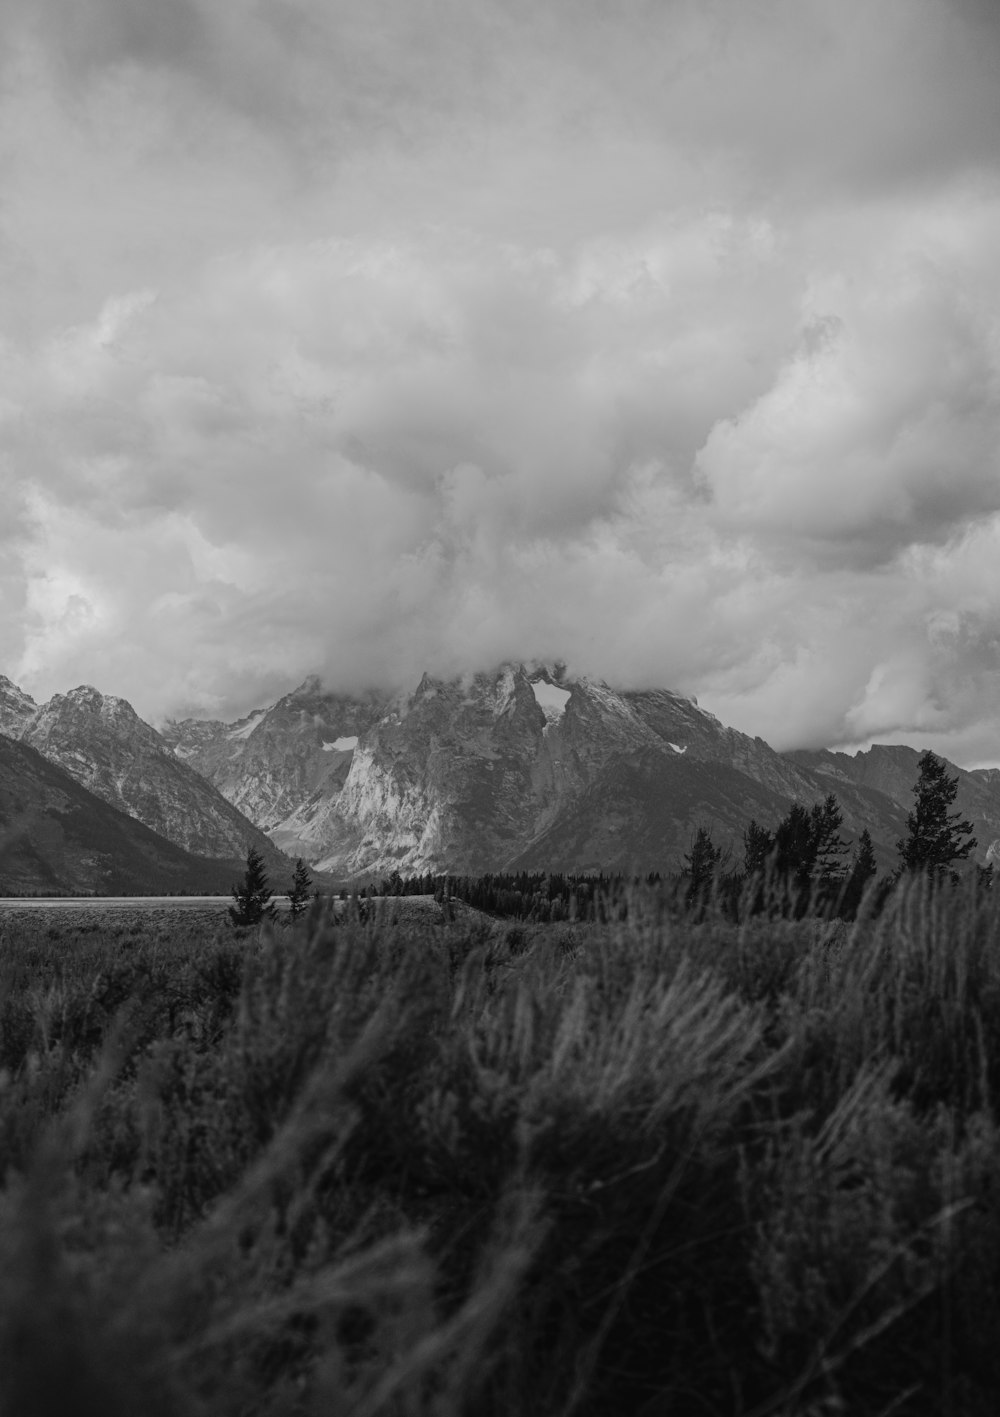 grayscale photo of person standing on grass field near mountain range